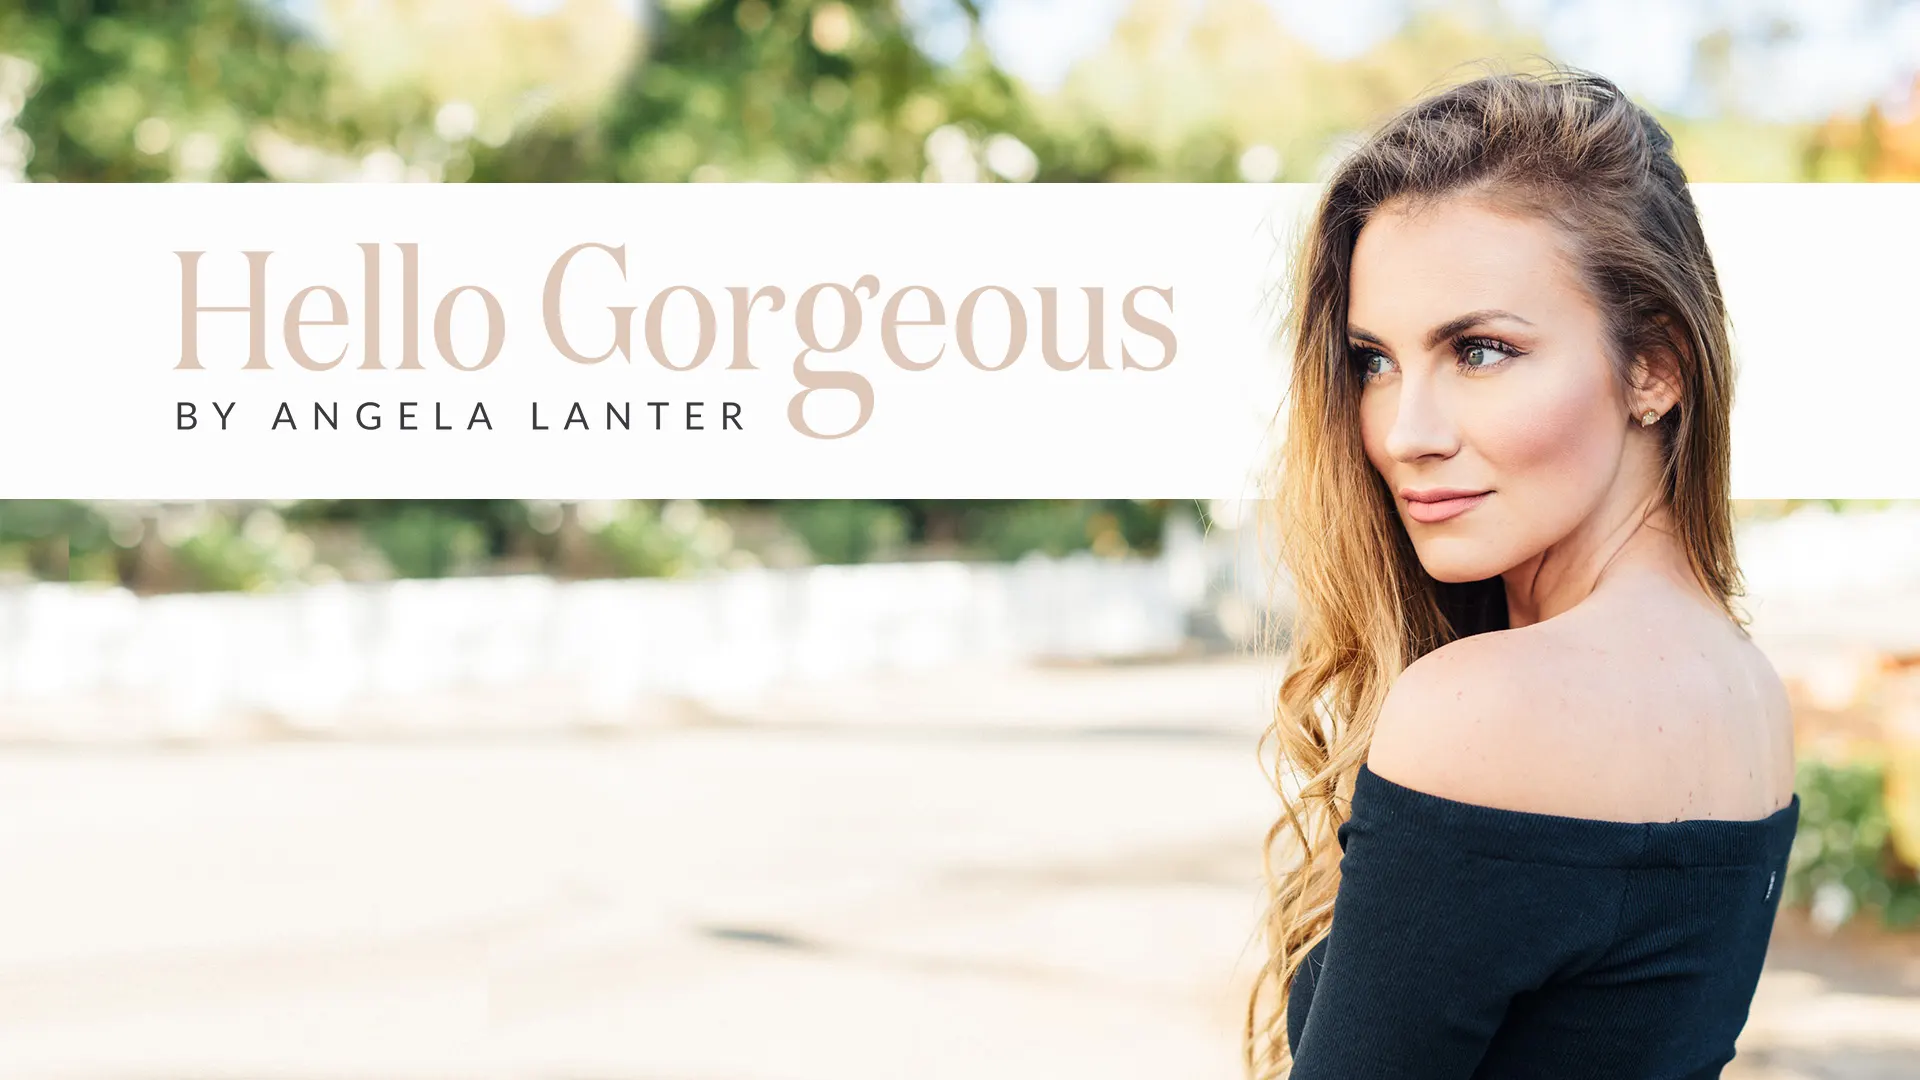 Dressed for Business - Hello Gorgeous, by Angela Lanter